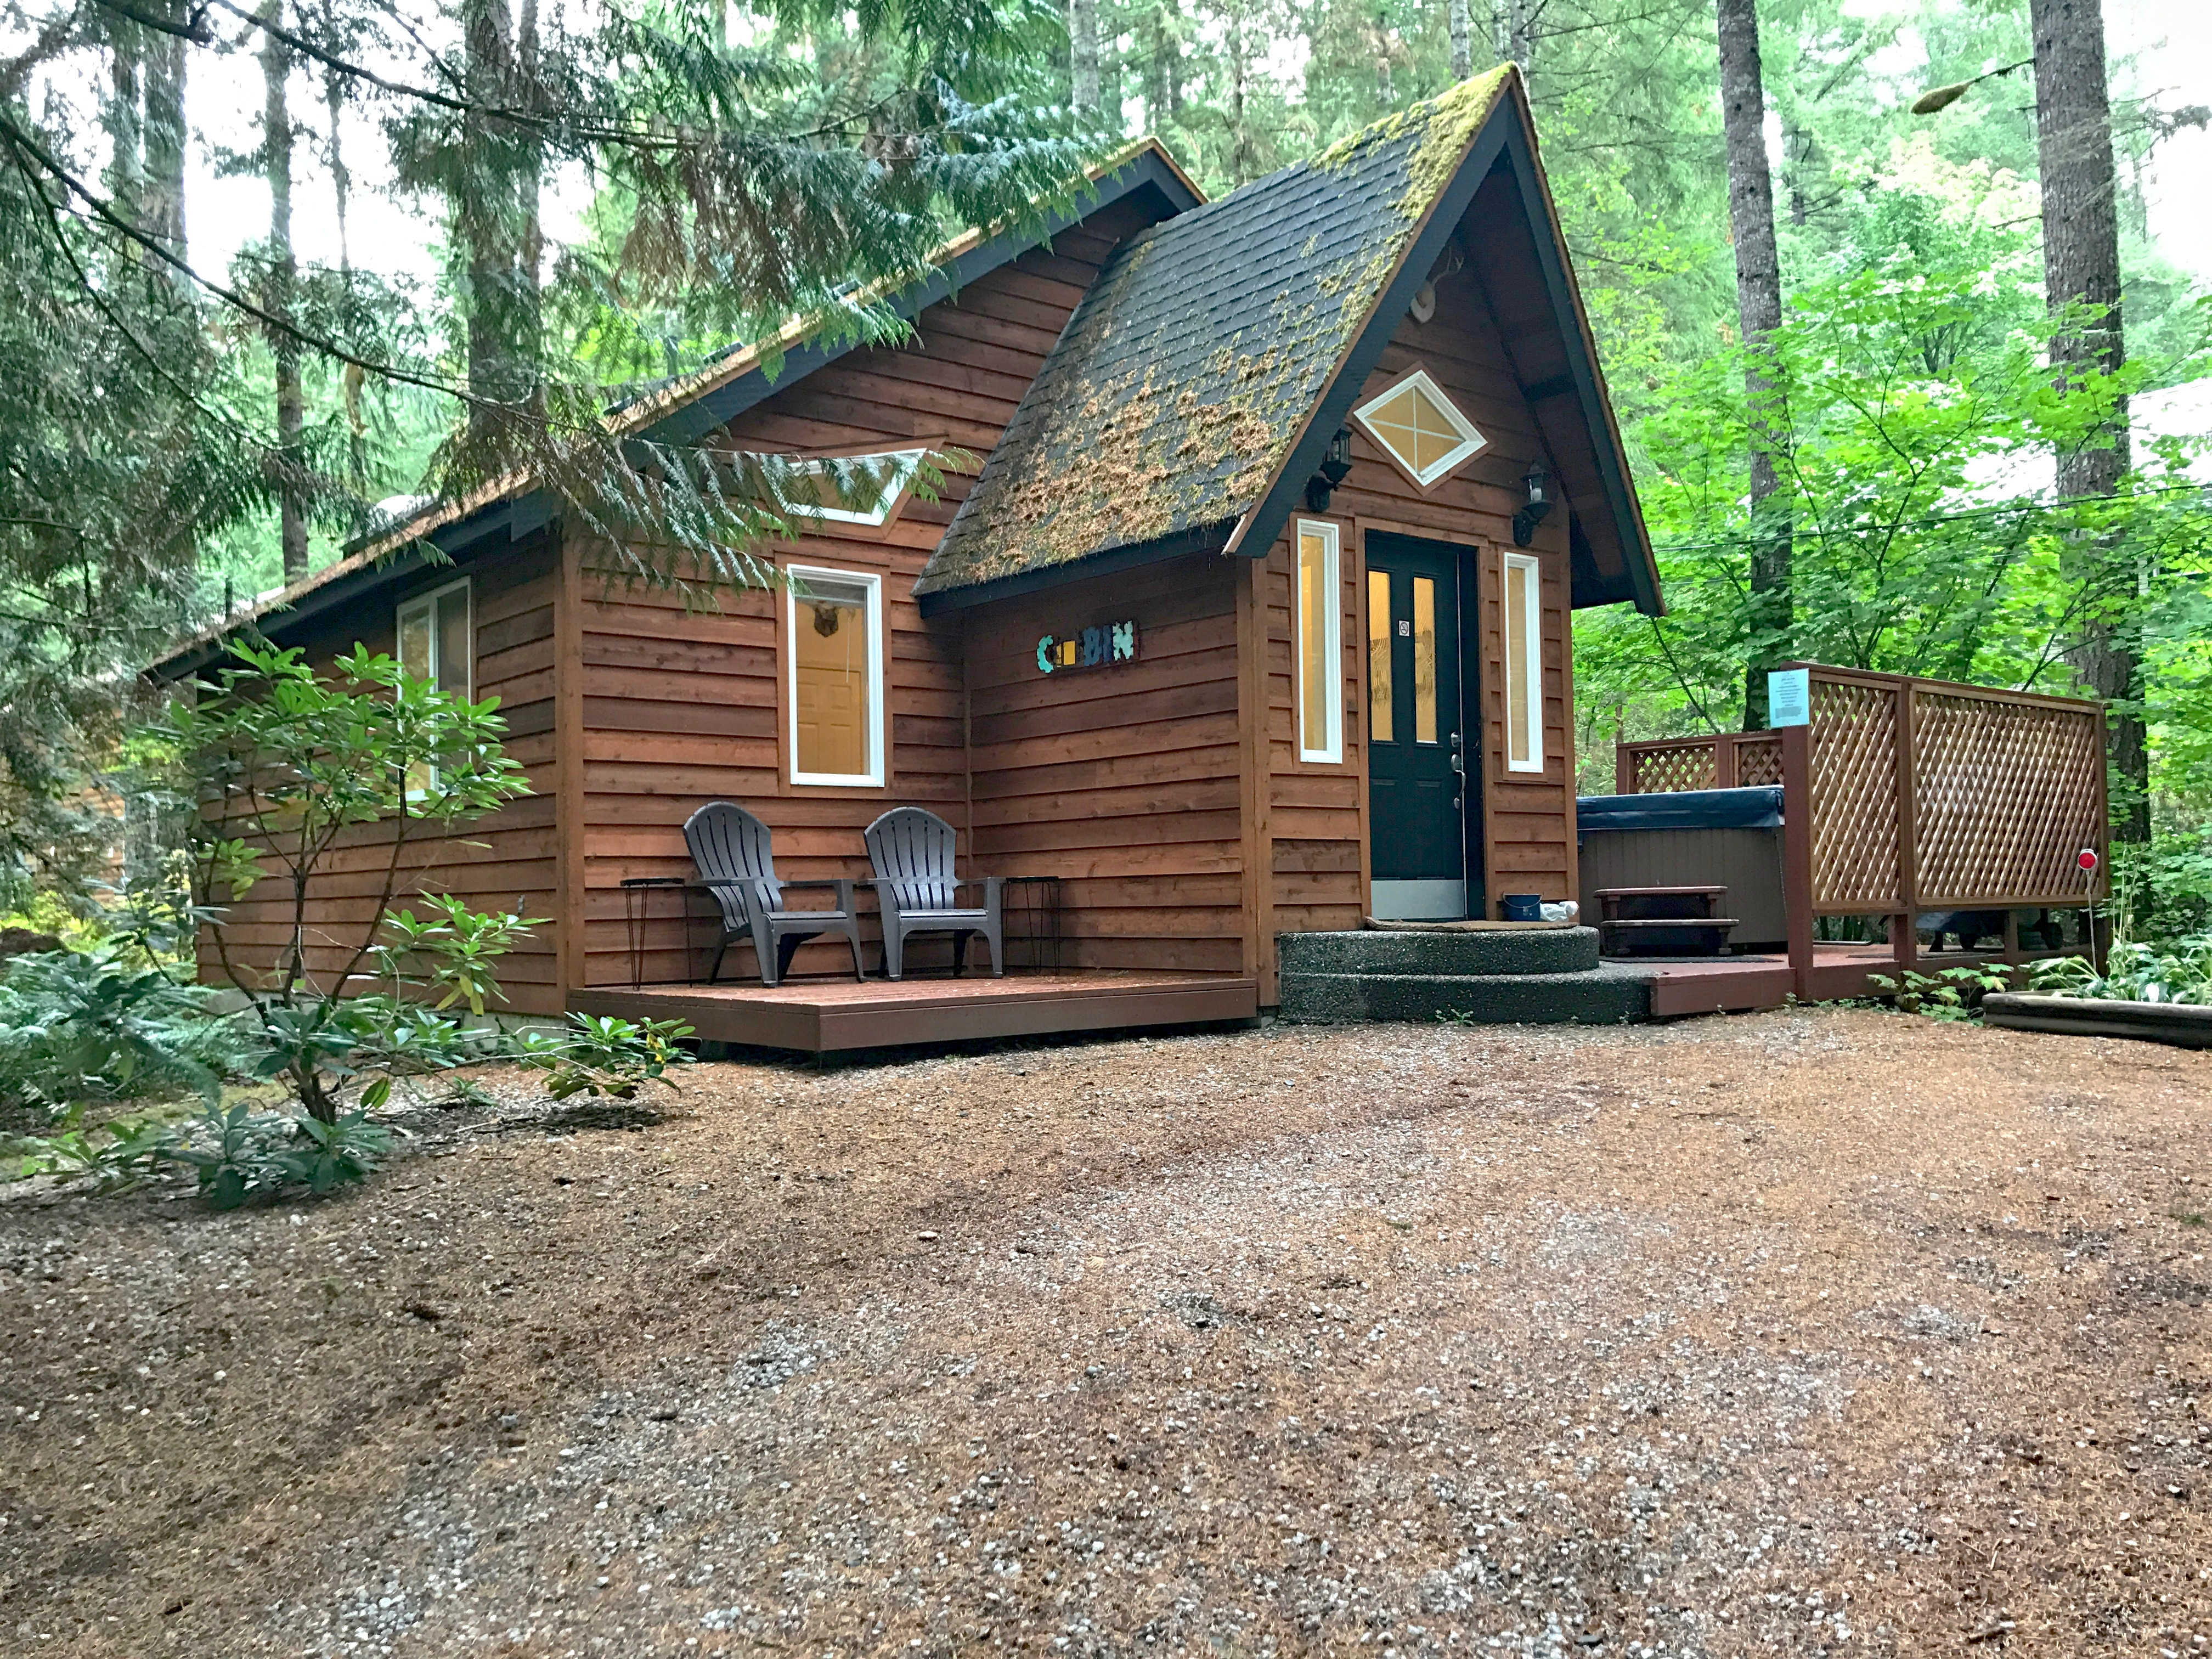 Camper submitted image from Mt. Baker Lodging - Cabin #16 - HOT TUB, FIREPLACE, W/D, D/W, BBQ, PETS OK, SLEEPS-4! - 5